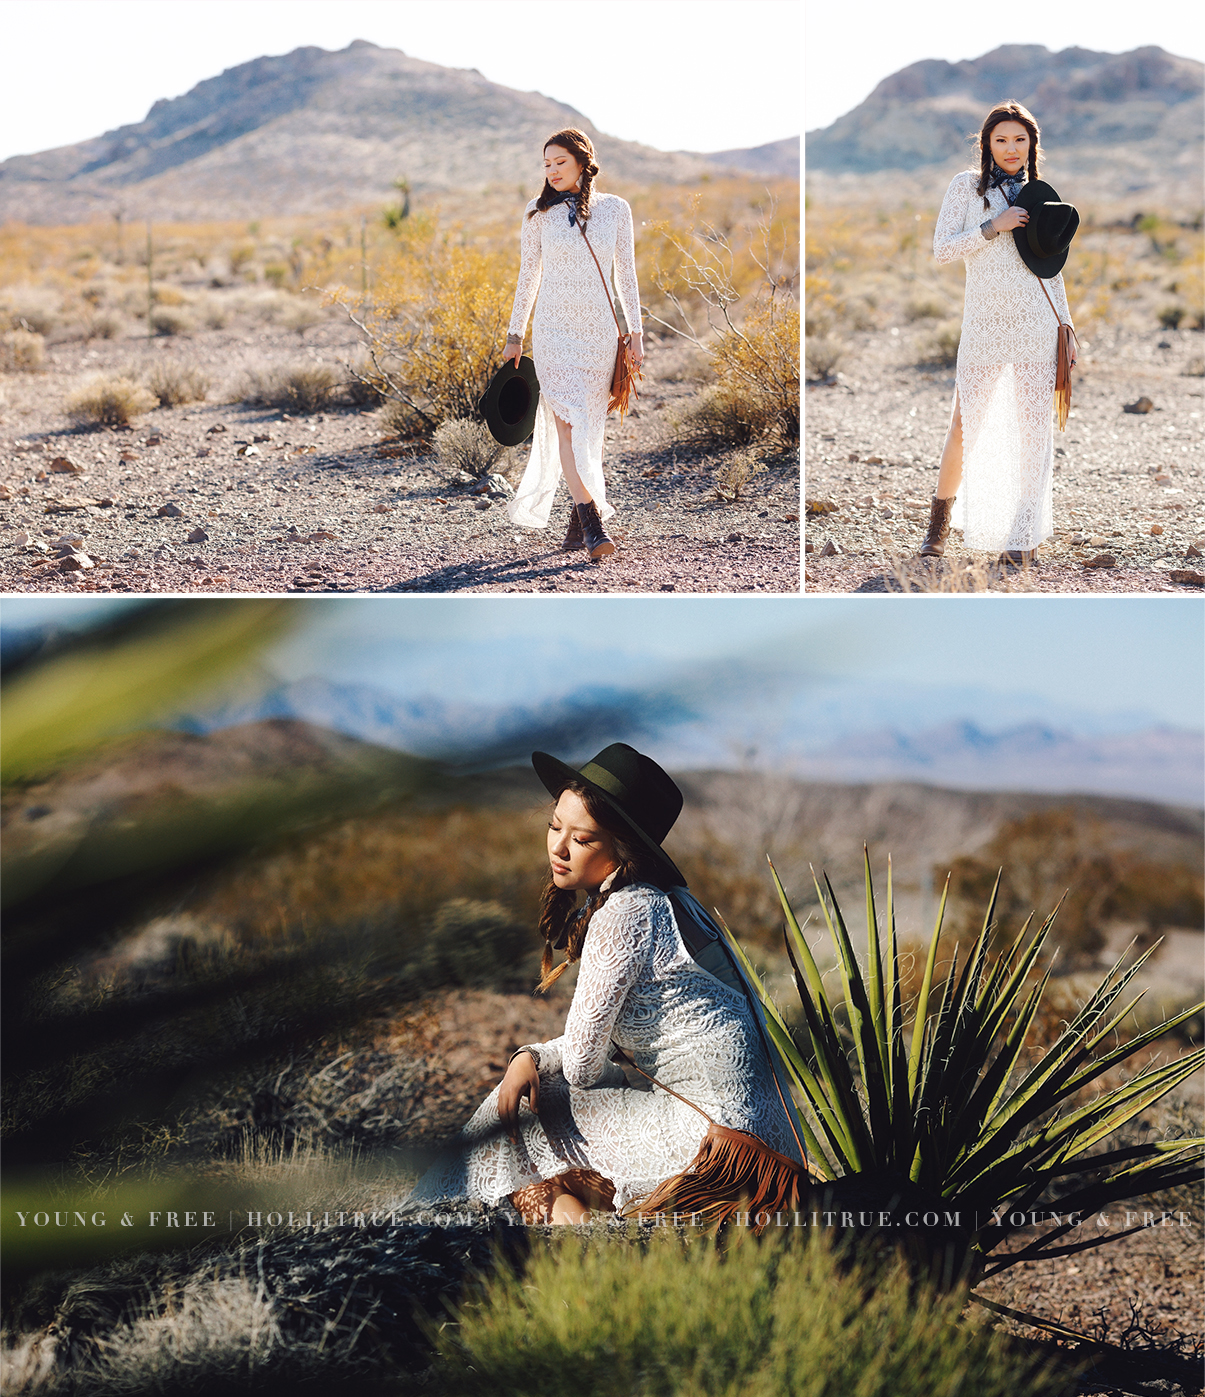 Nelson Ghost Town Senior Portrait Model Session | Deconstructed Shootout in Las Vegas, Nevada | Holli True Photography | Stylish Senior Photography in a desert location